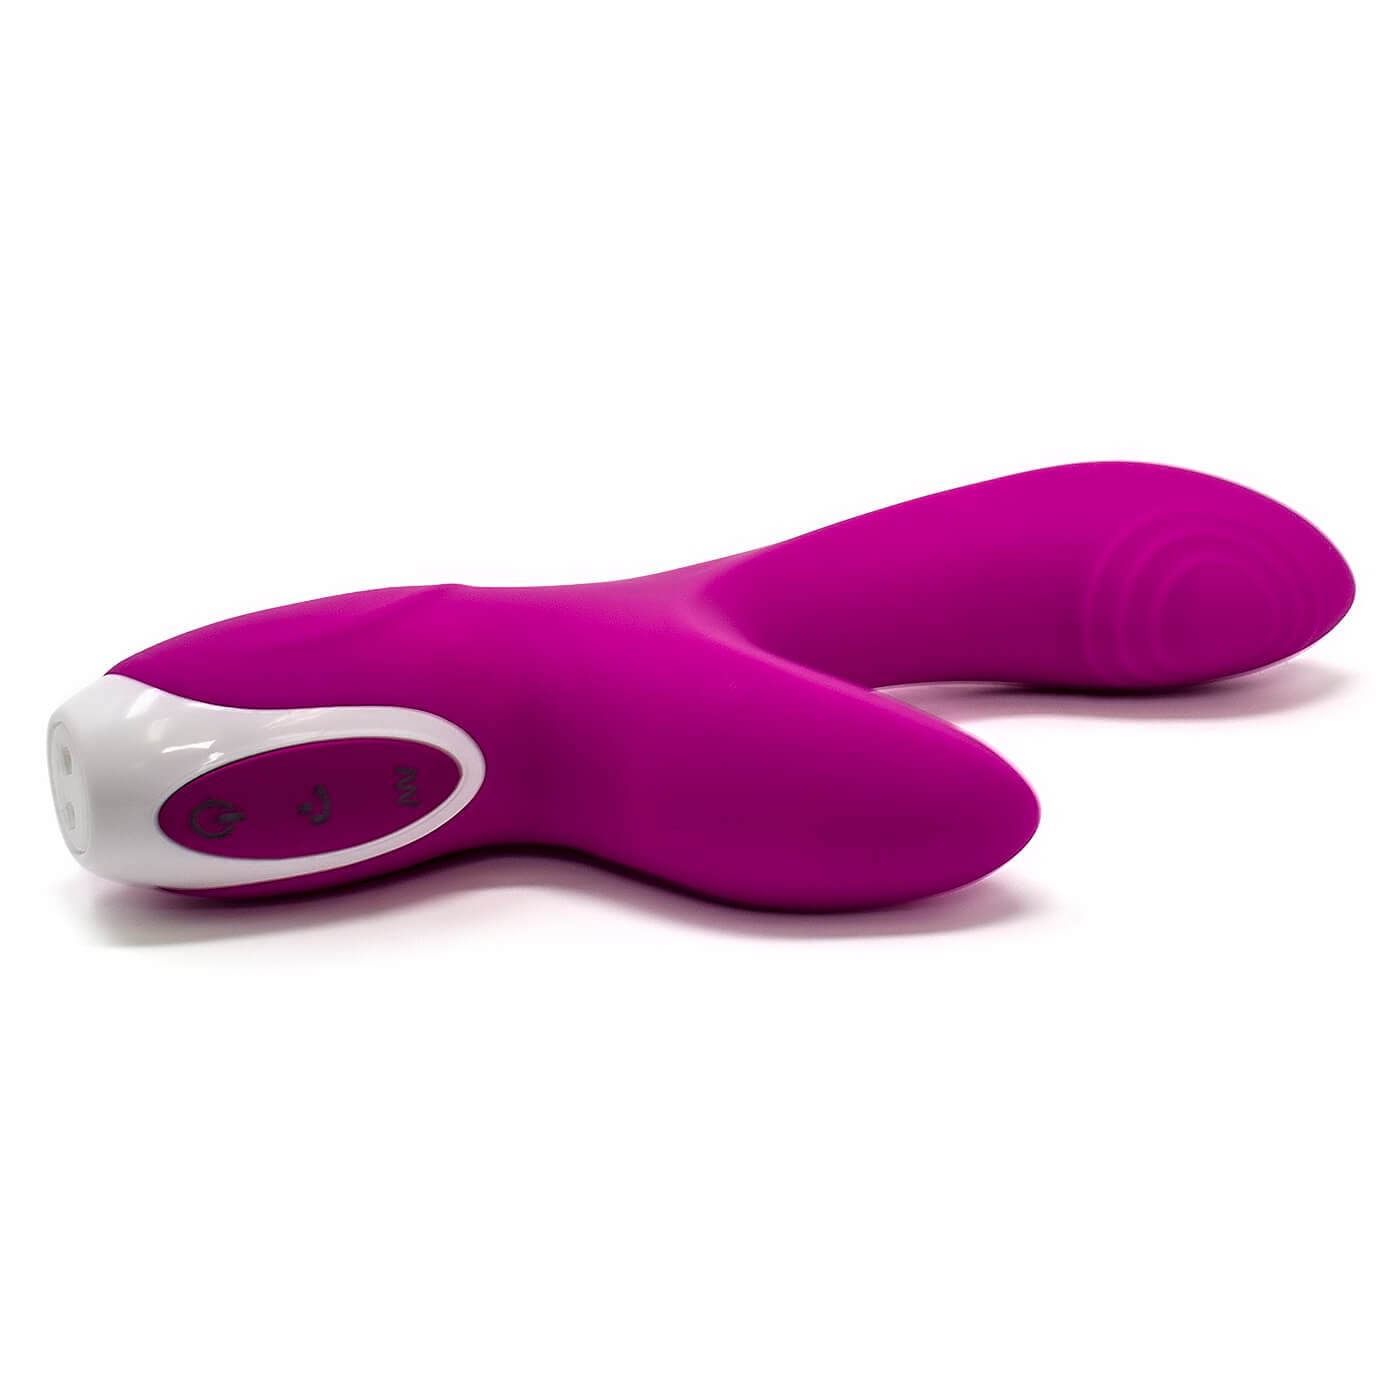 Evolved Novelties Love Button 10 Function USB Rechargeable Clitoral & G-Spot Vibrator